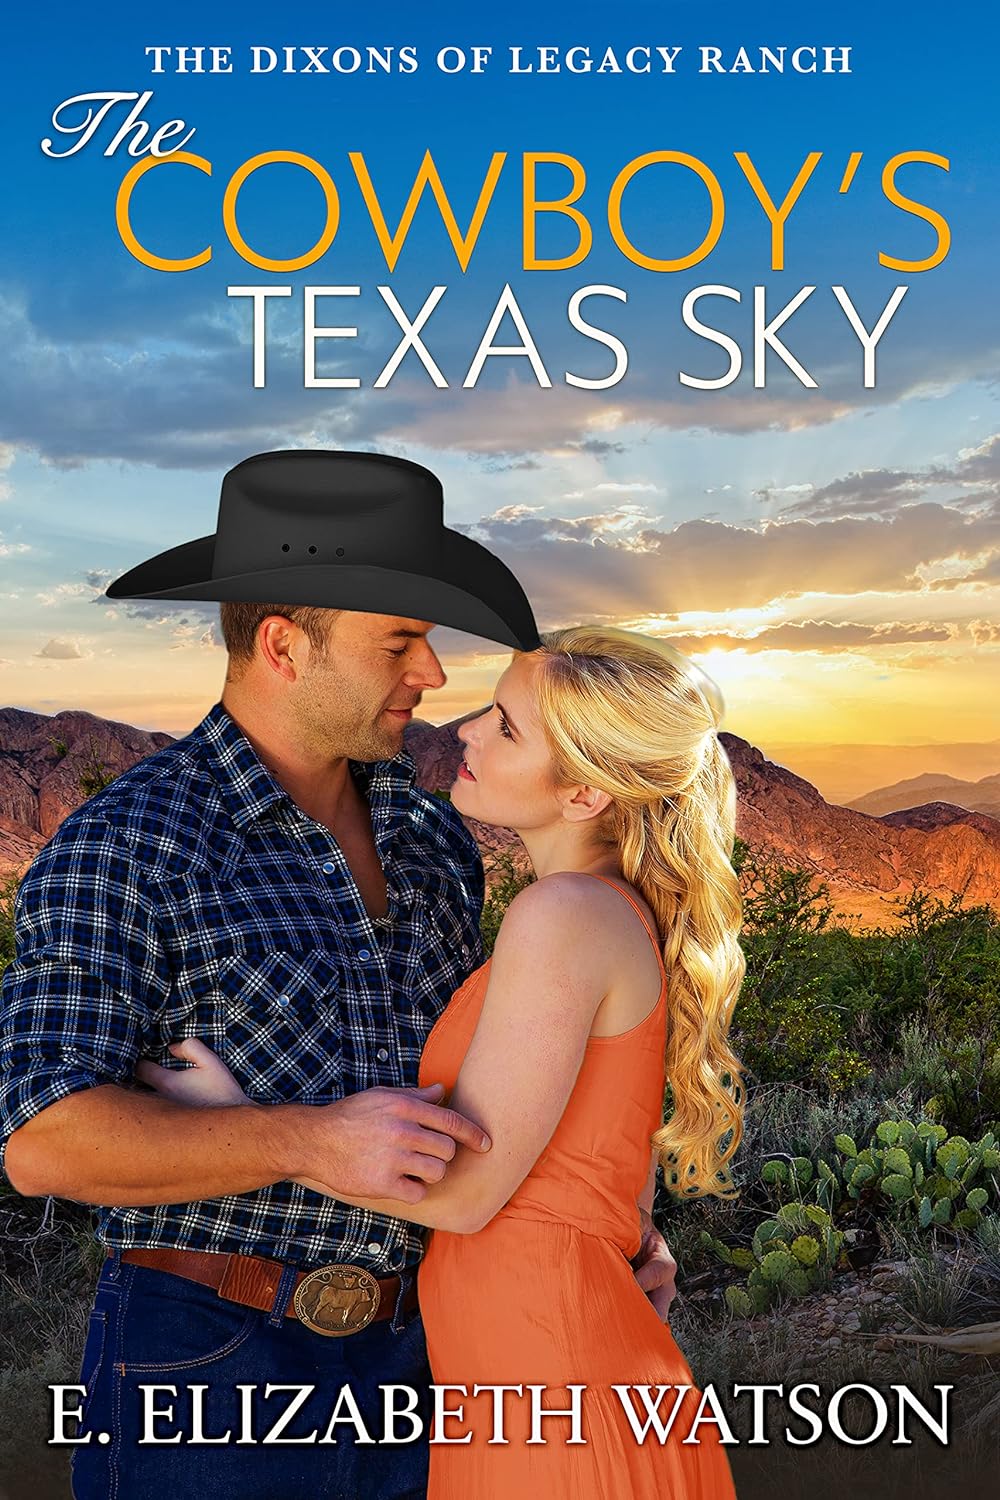 The Cowboys Texas Sky by Bestselling Author E Elizabeth Watson